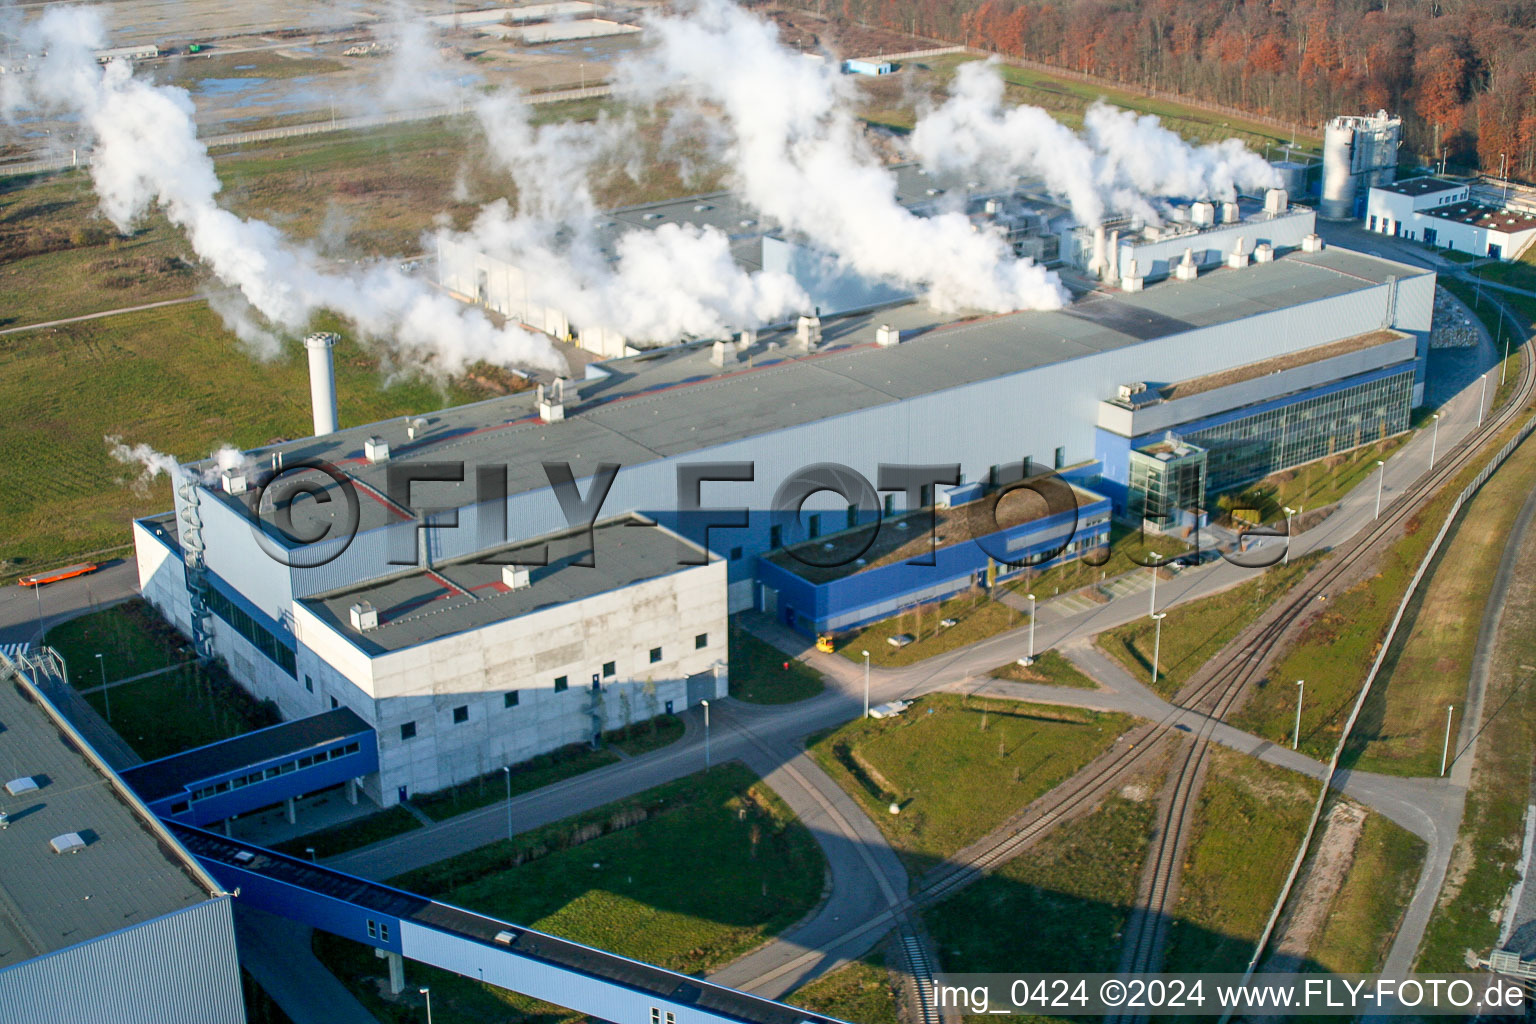 Oblique view of Palm paper factory in the Oberwald industrial area in Wörth am Rhein in the state Rhineland-Palatinate, Germany